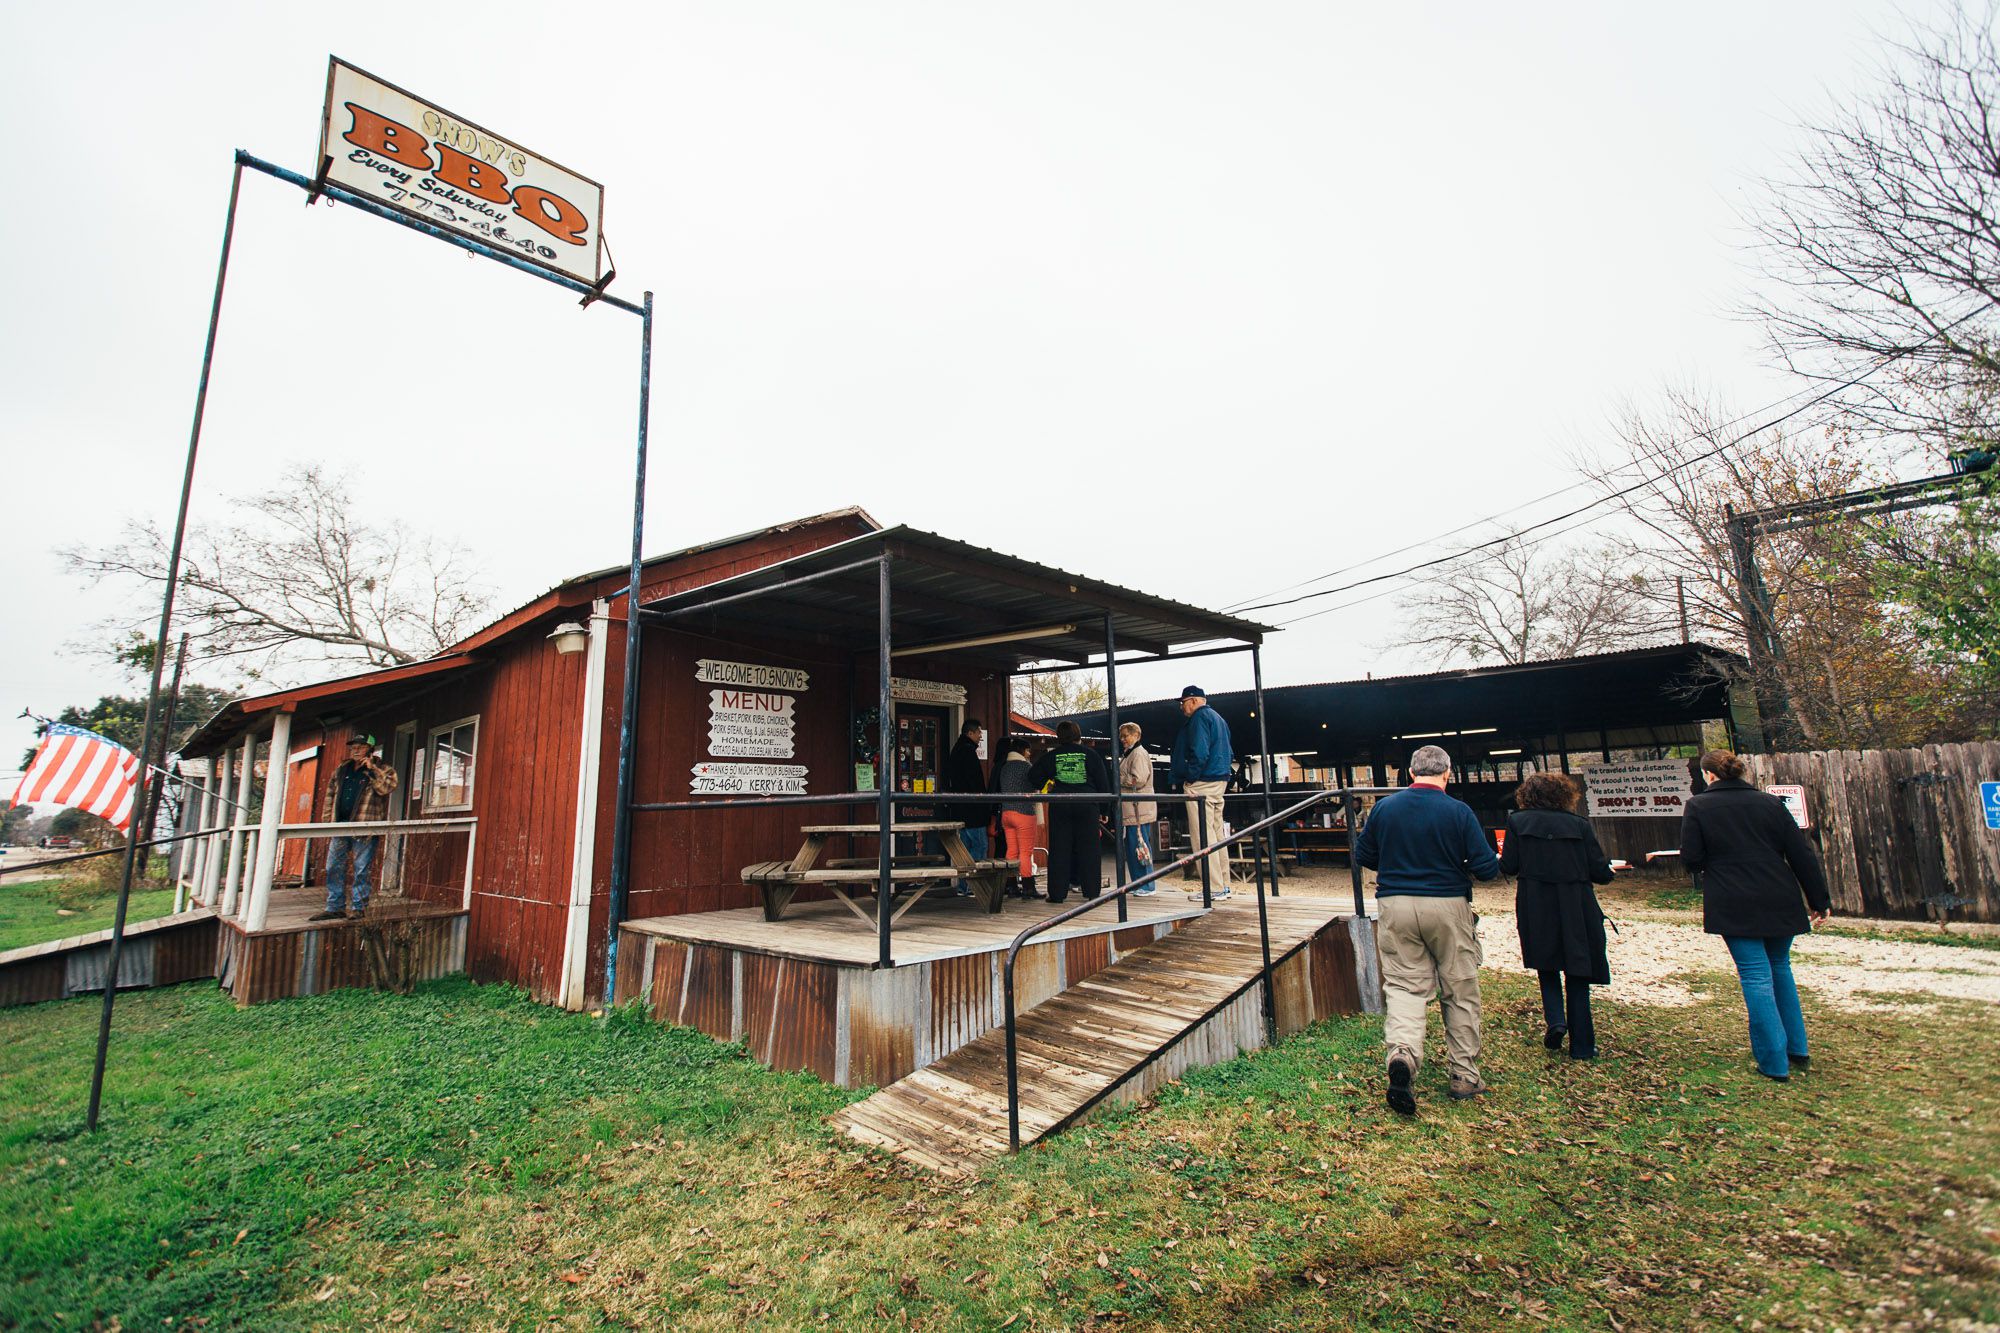 How Snow's BBQ Rose From Obscurity to Texas Barbecue Stardom - Eater